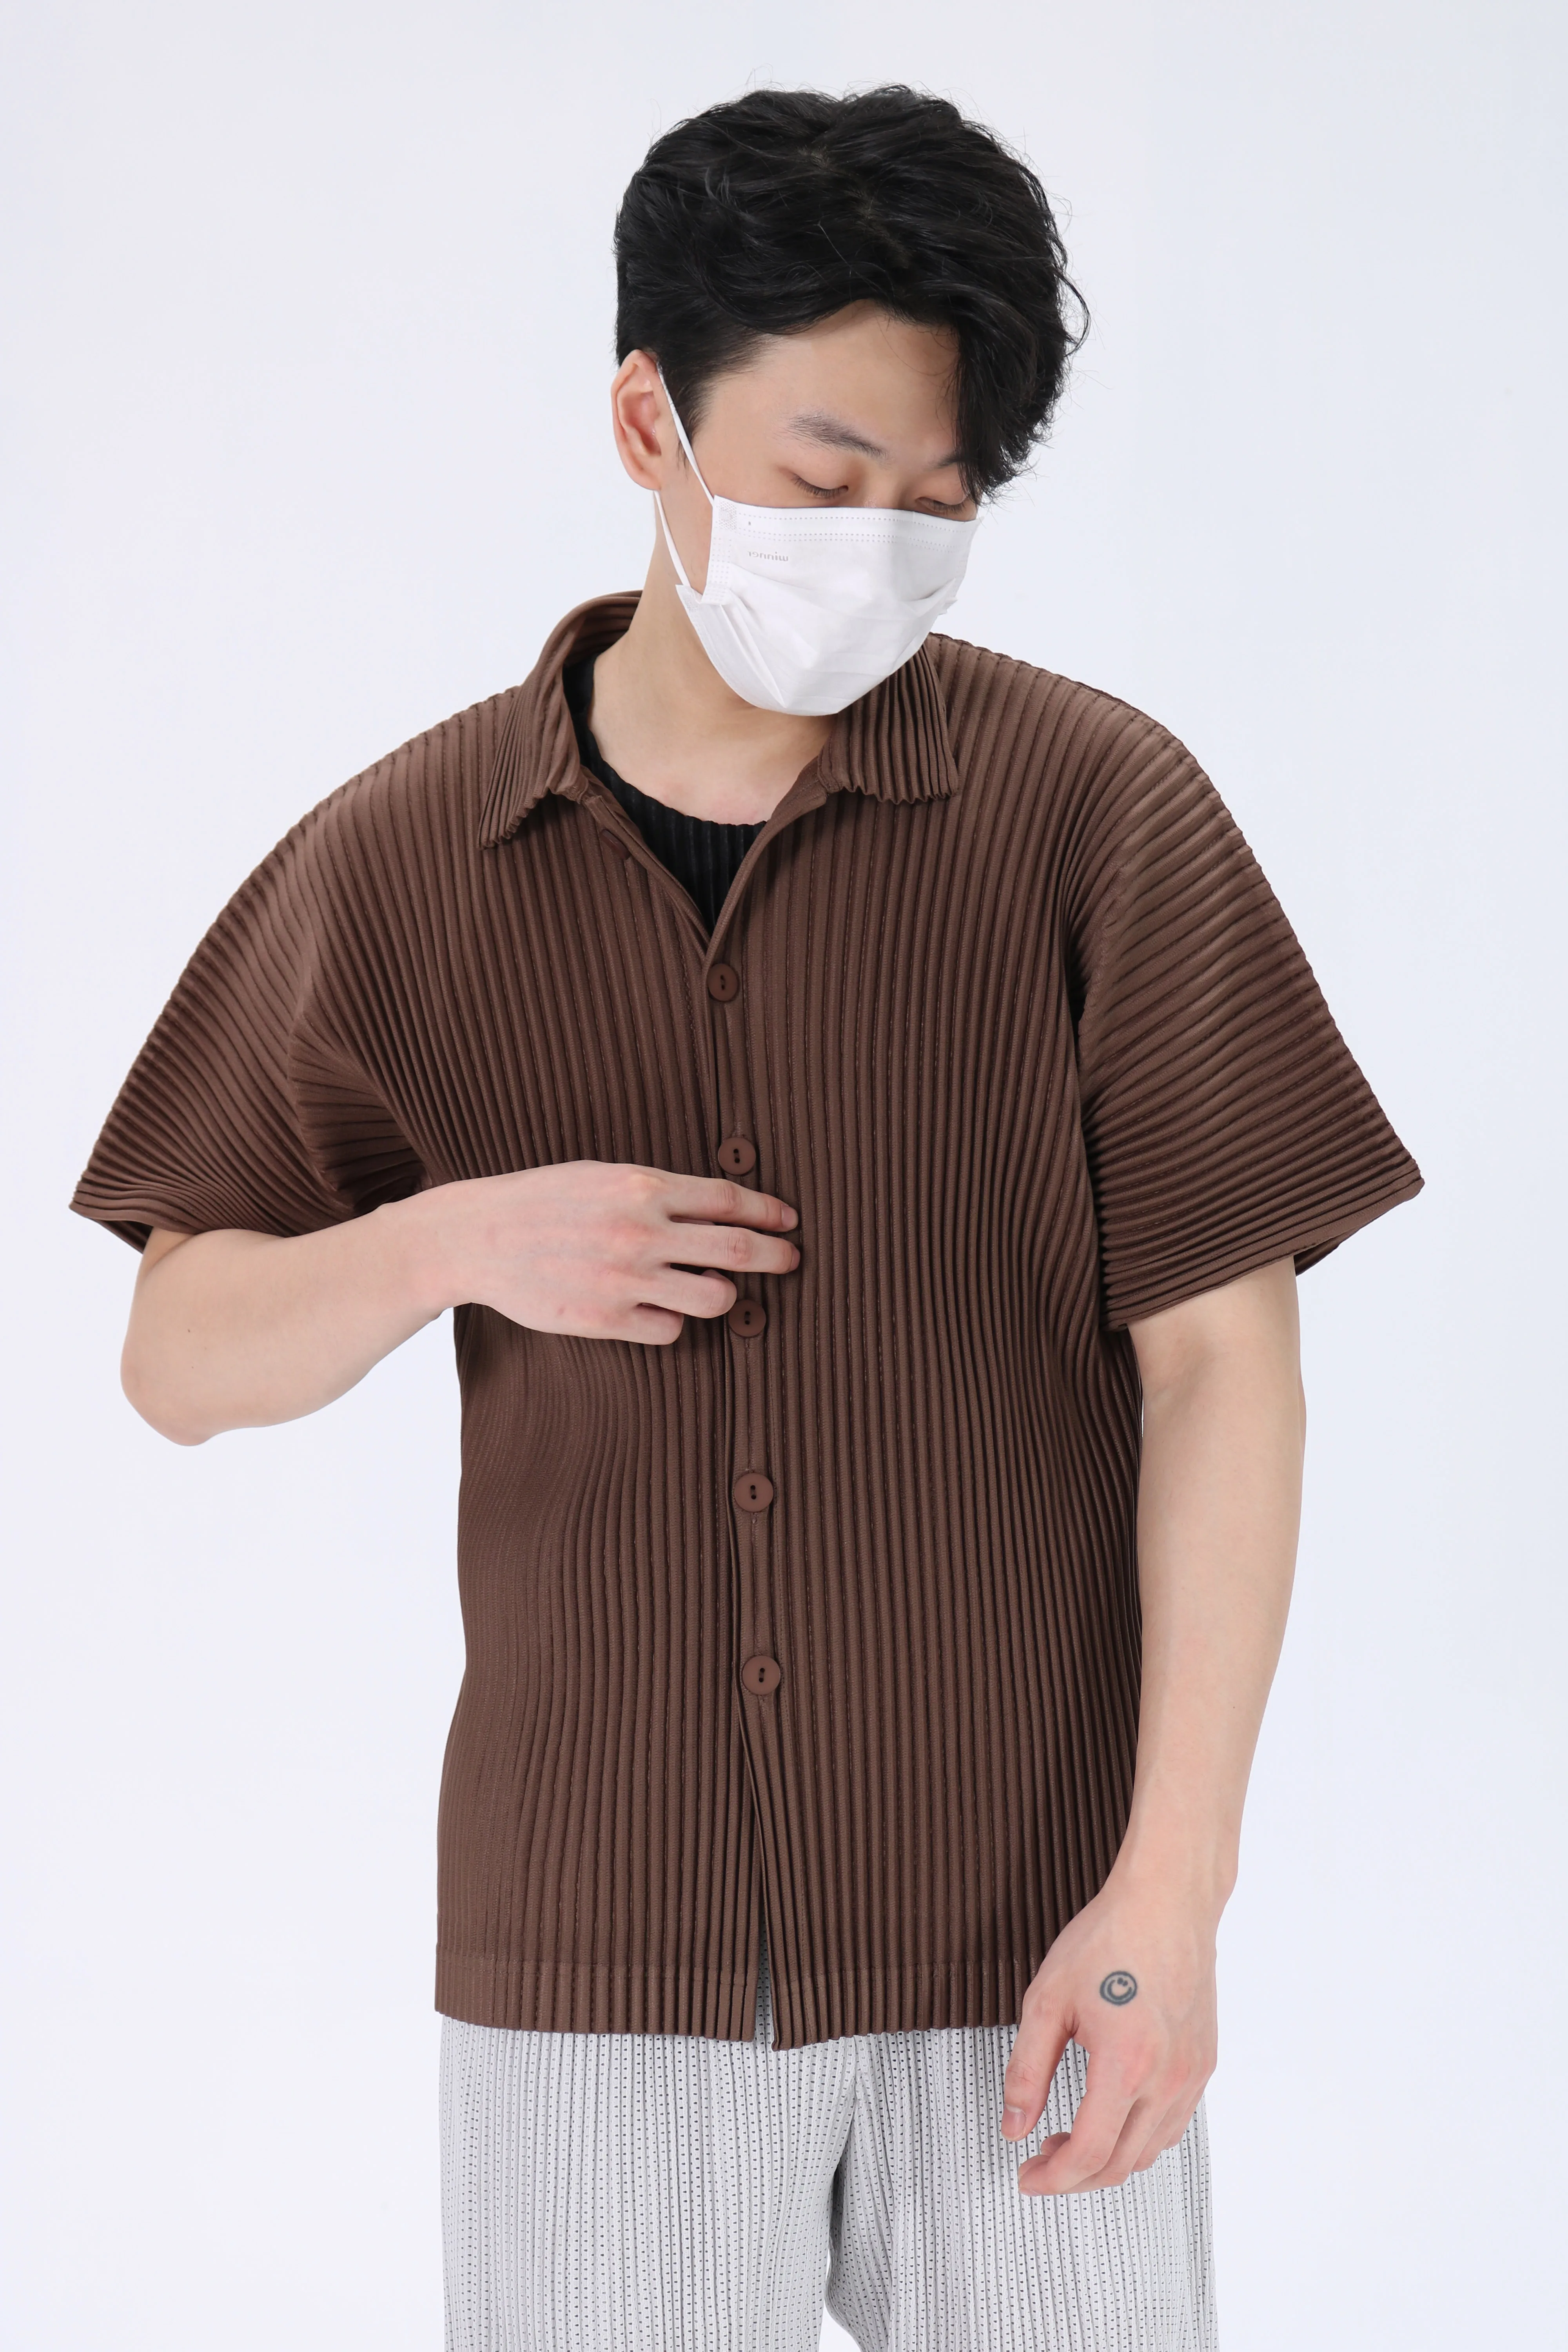 Pleated Polo Shirt  miteigi Homme Plissé Issey Miyaki Men's Casual Short Sleeves ribbed Button Up Loose Vintage Tops Shirts for man in dark brown Summer plus size mens Business workwear Fashion